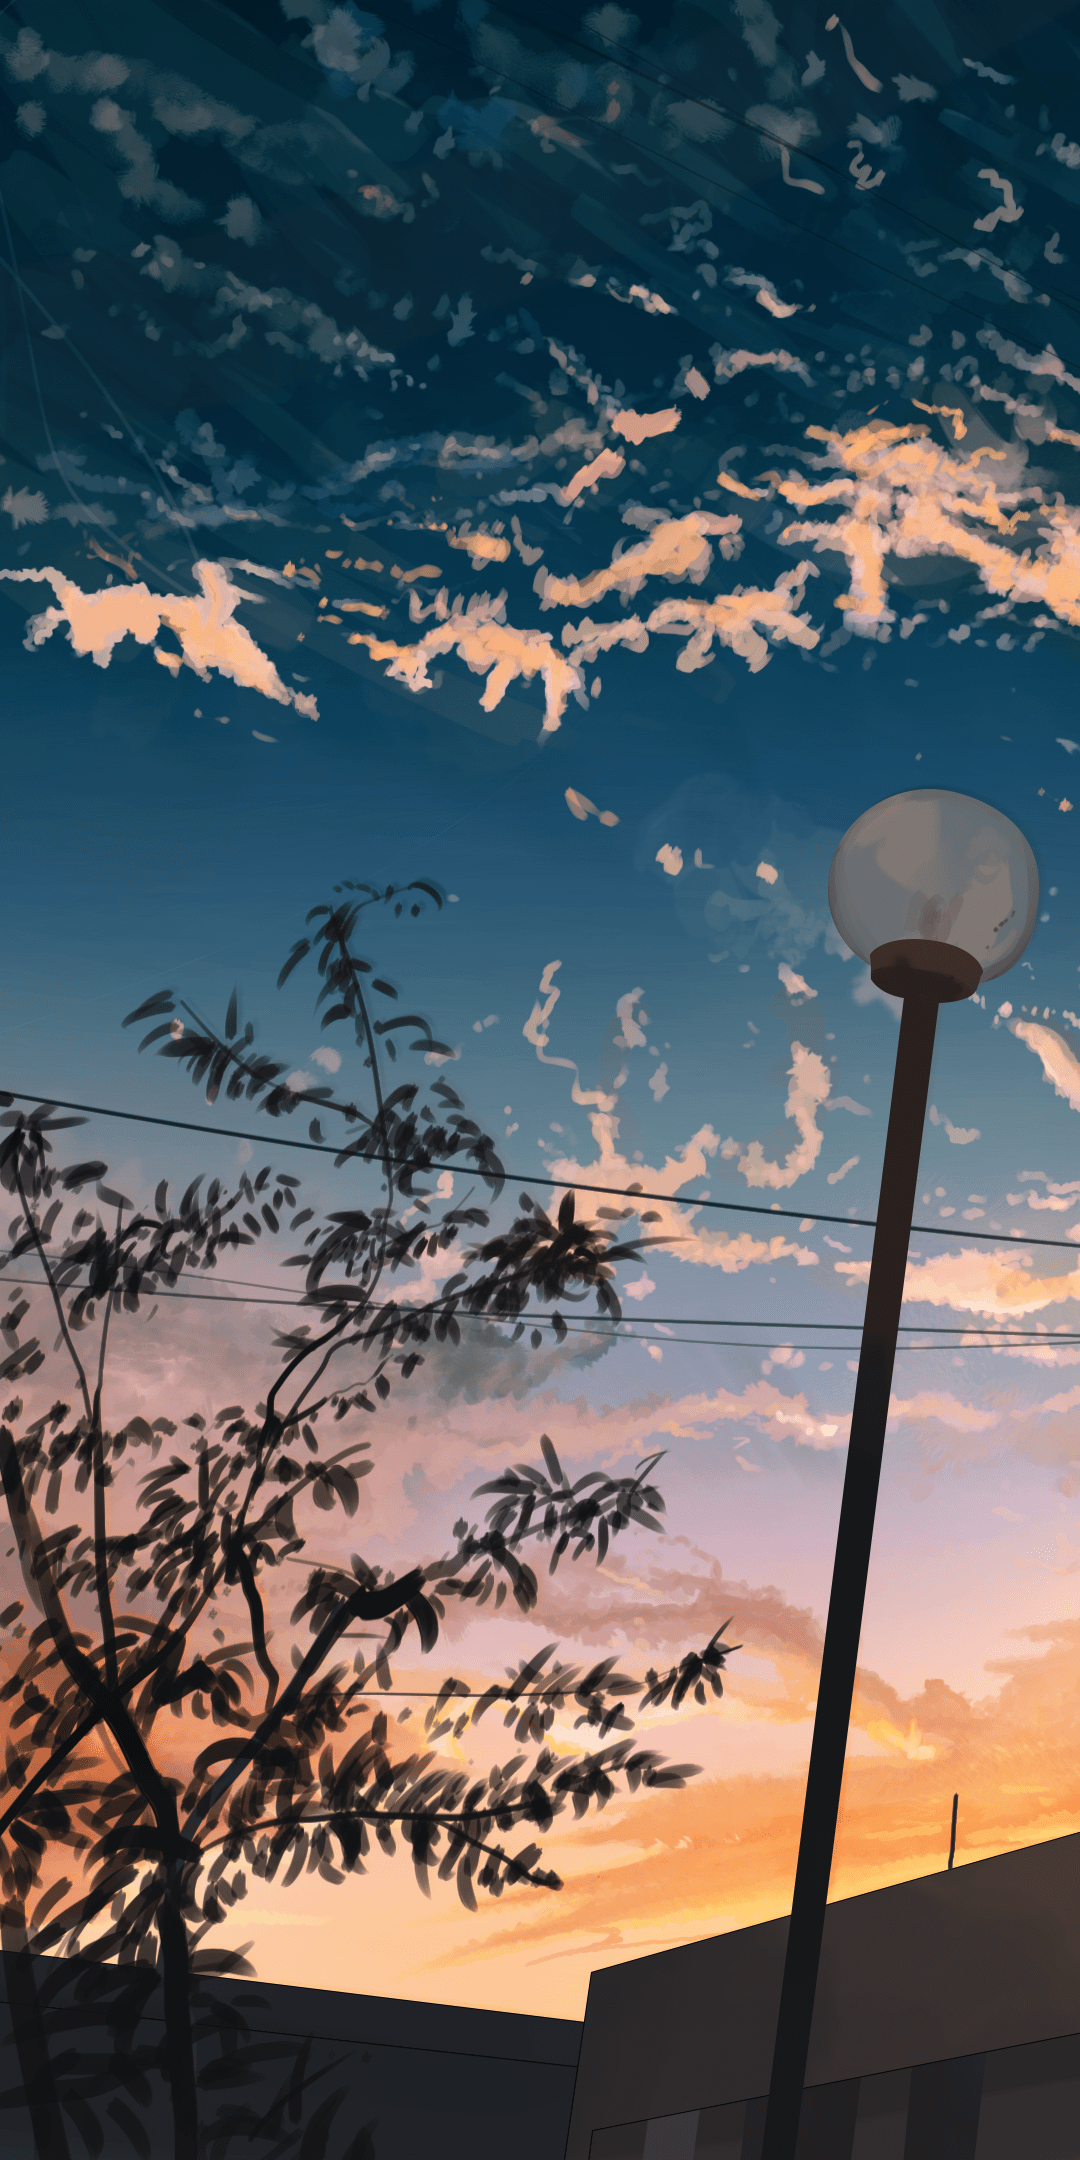 An anime style image of a street lamp at sunset - Anime sunset